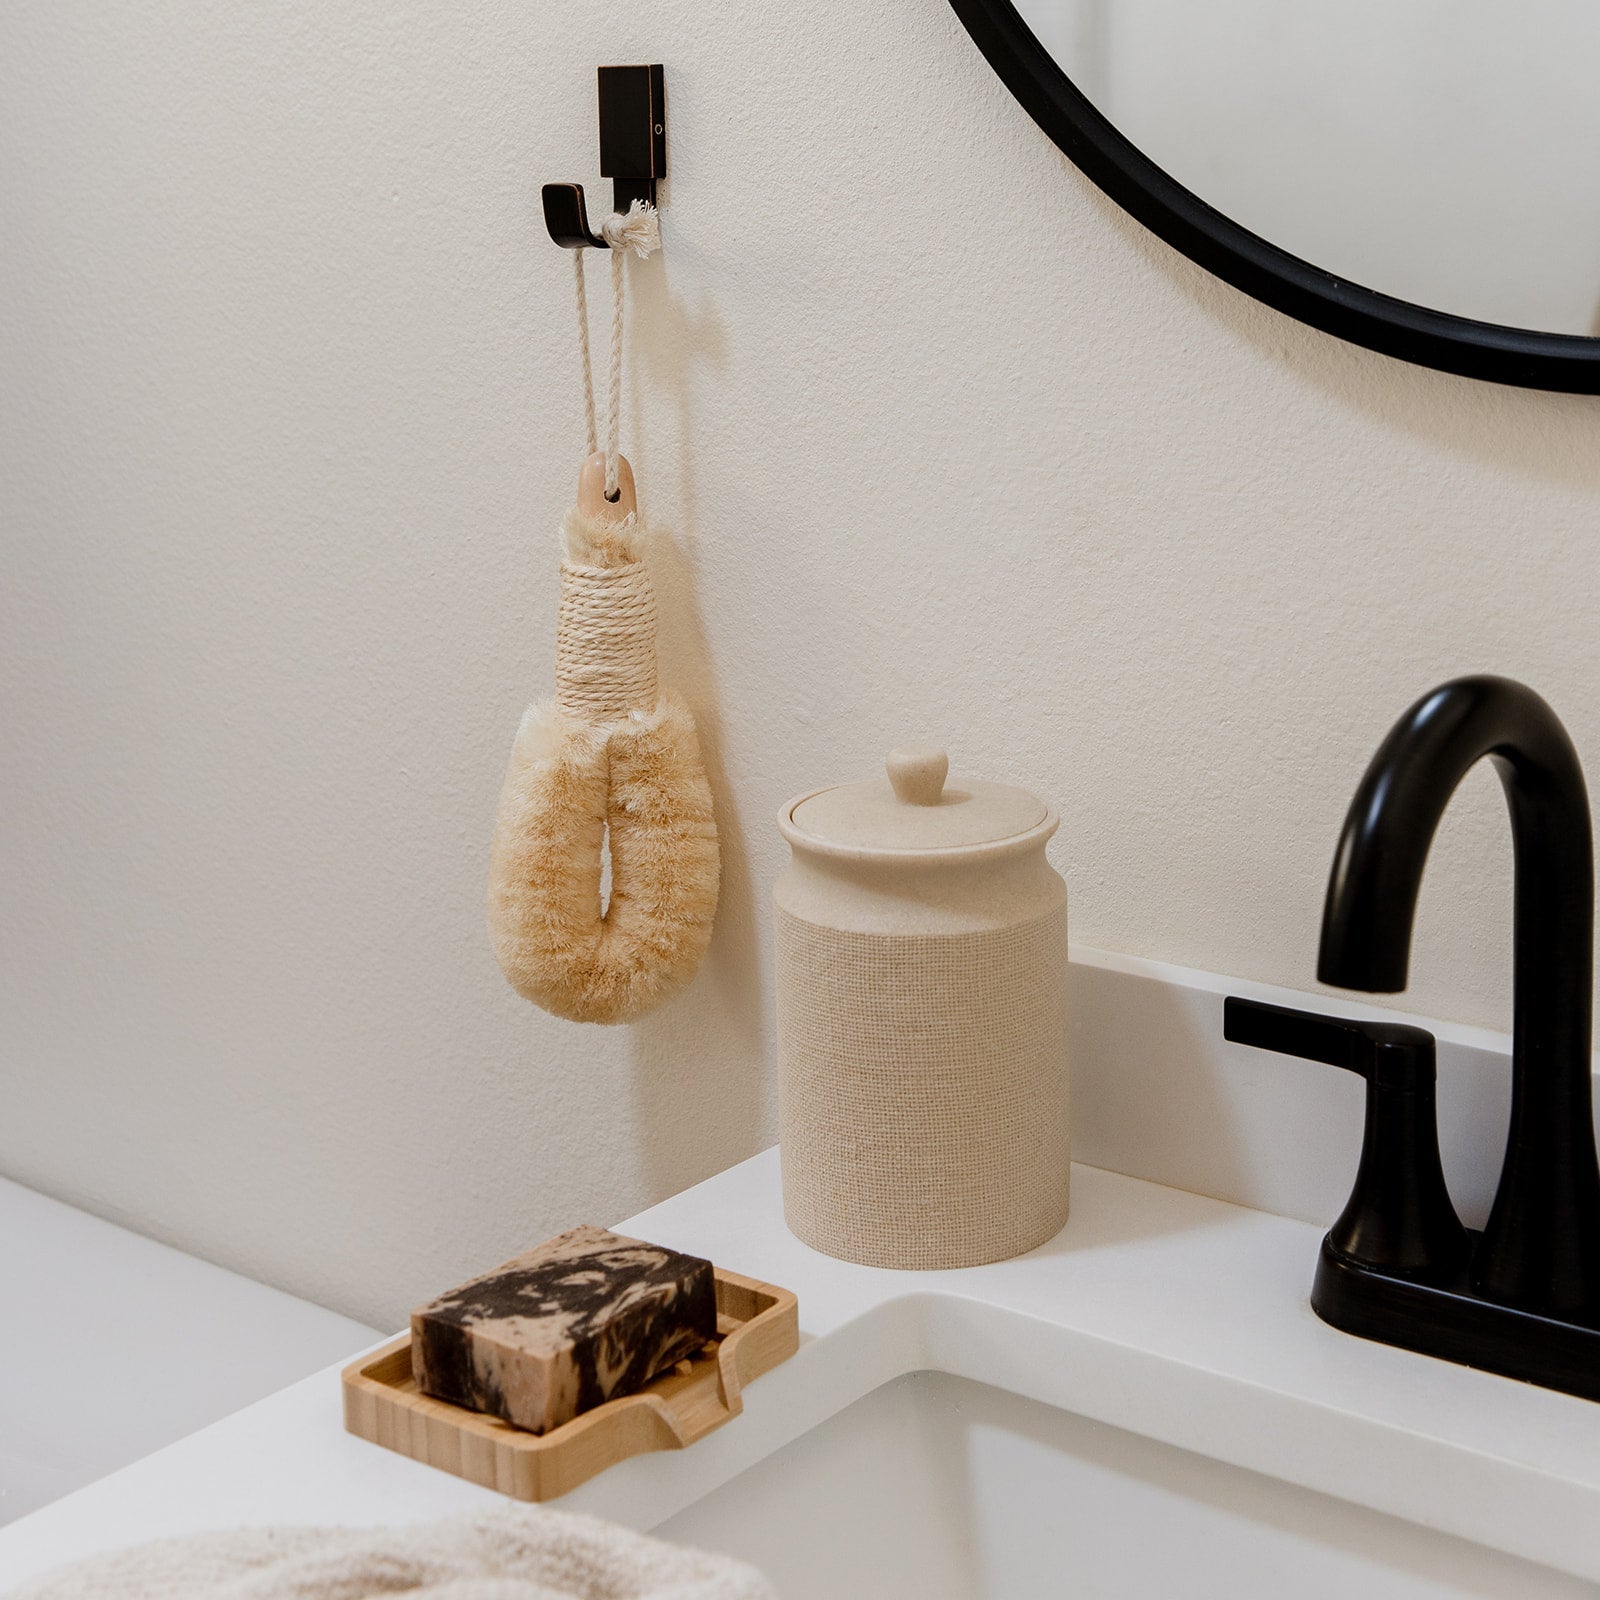 Sustainable bathroom and body products